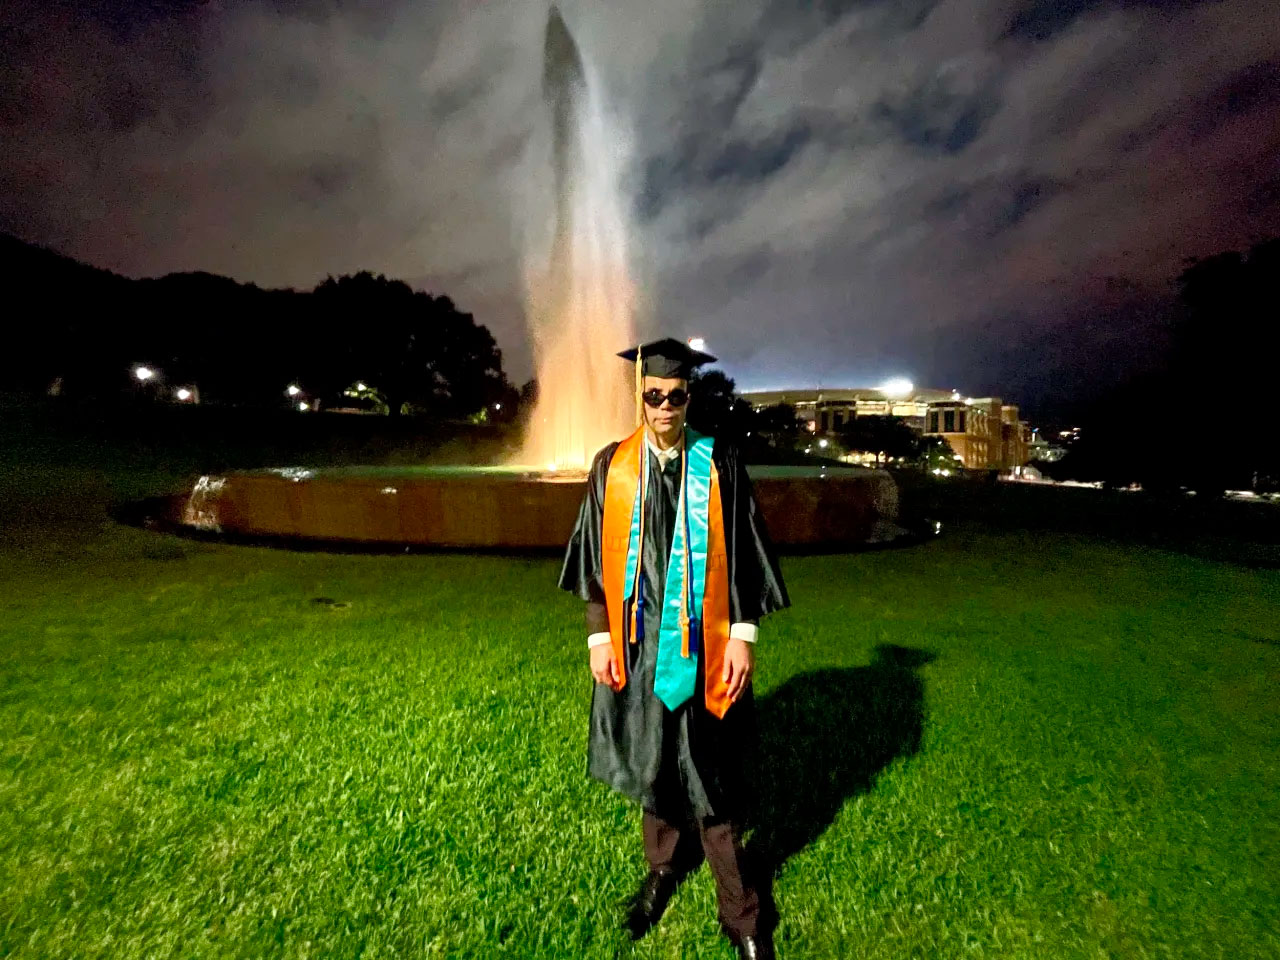 Qusay in graduation gown and cap by fountain